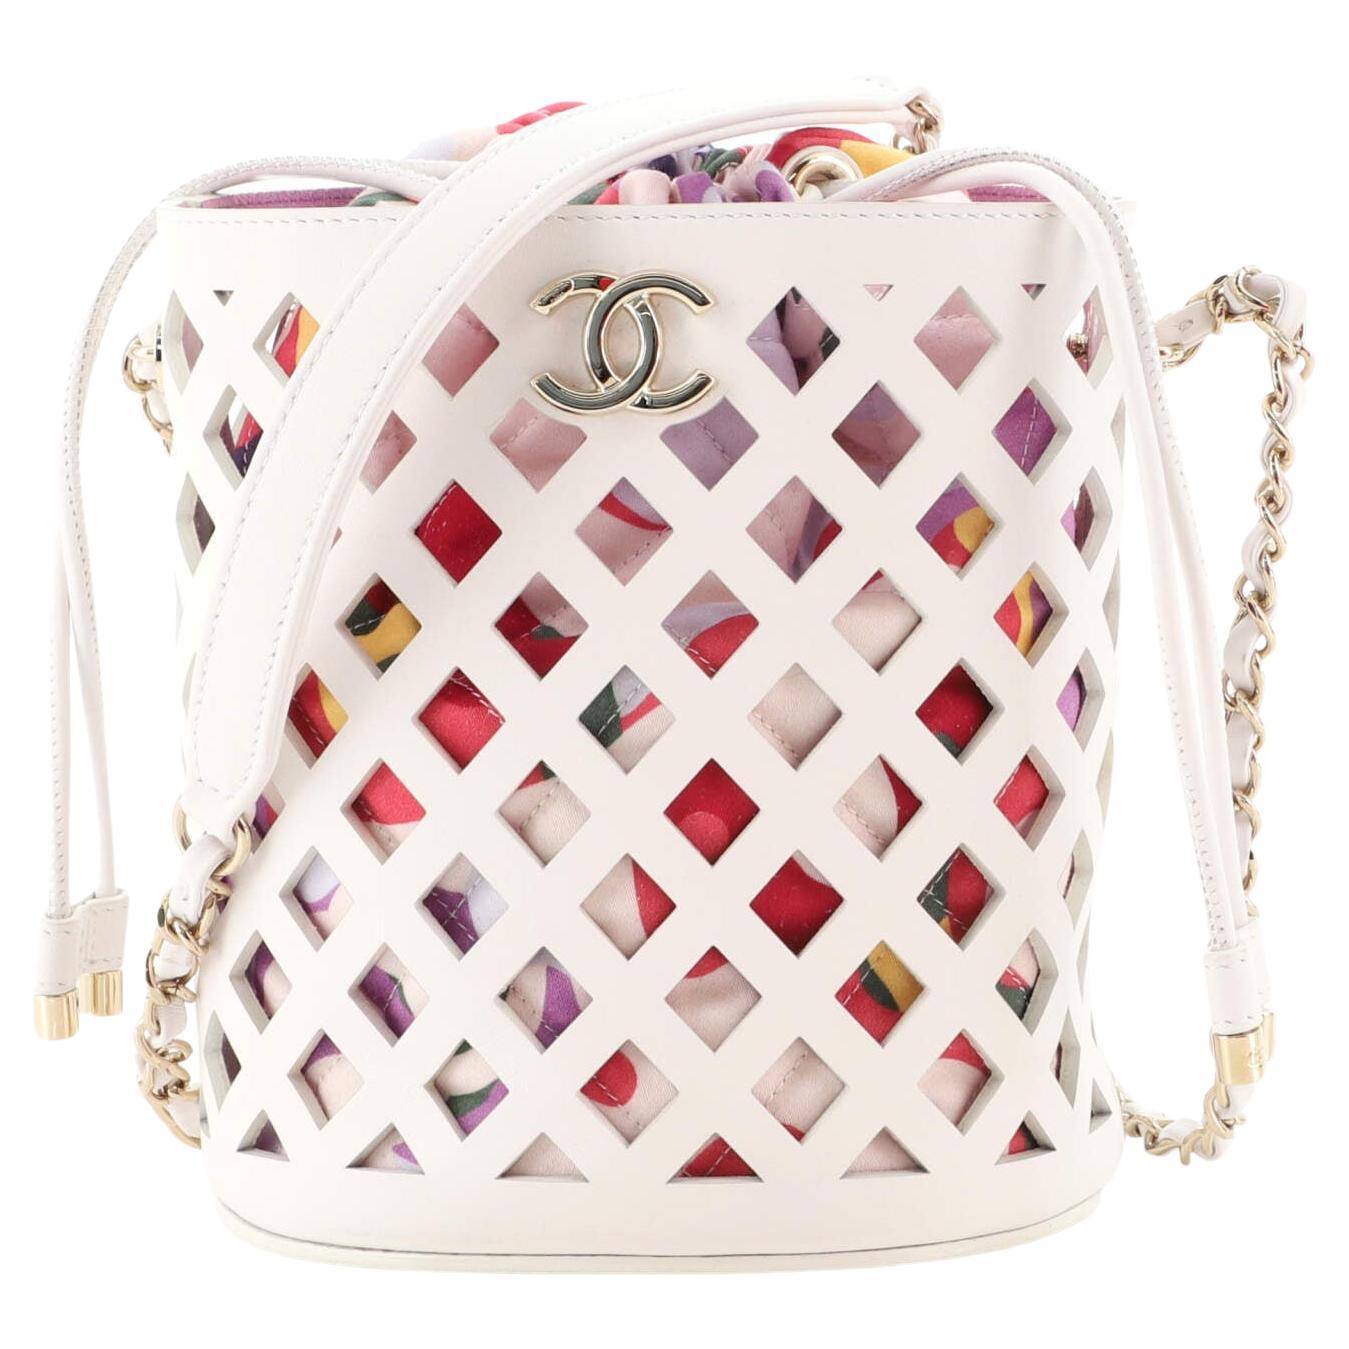 Chanel See Through Drawstring Bucket Bag Perforated Leather with Quilted 